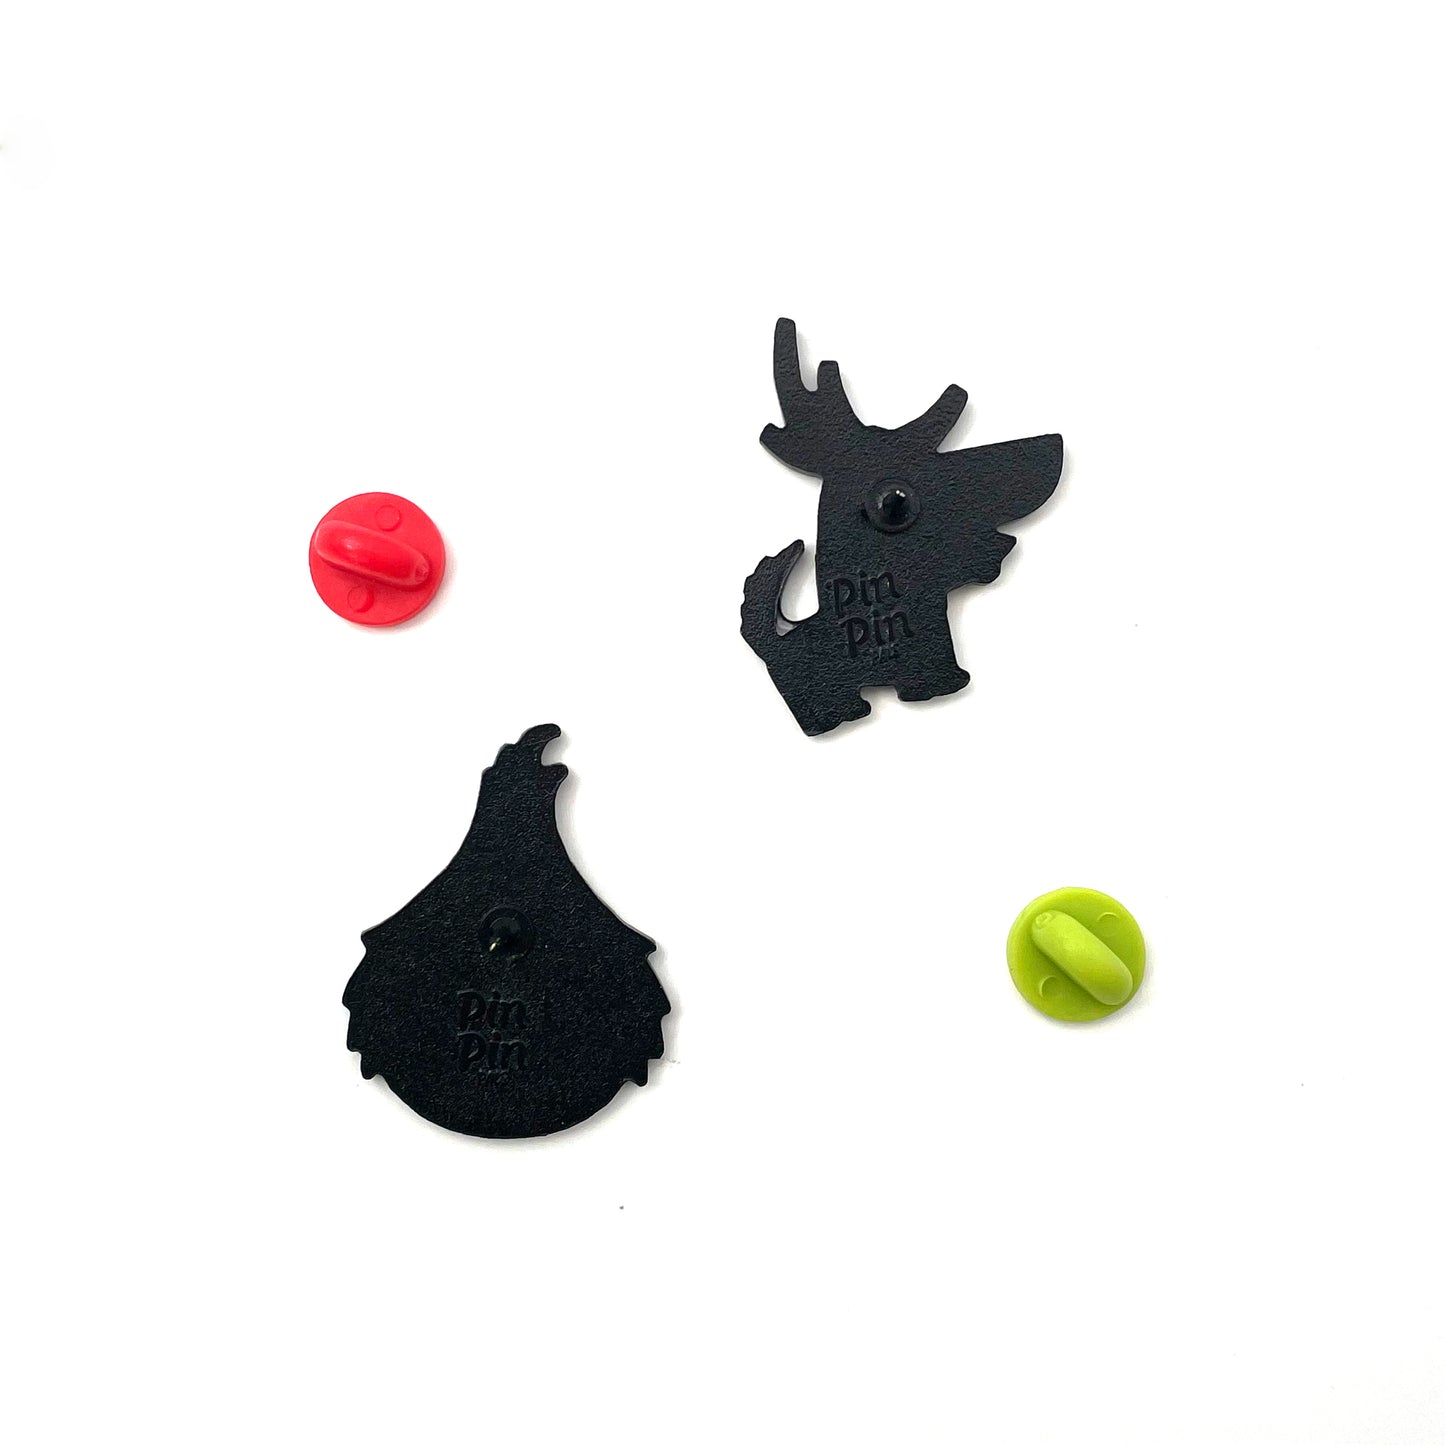 Backs of The Grinch and Max enamel pins with red and green rubber backings